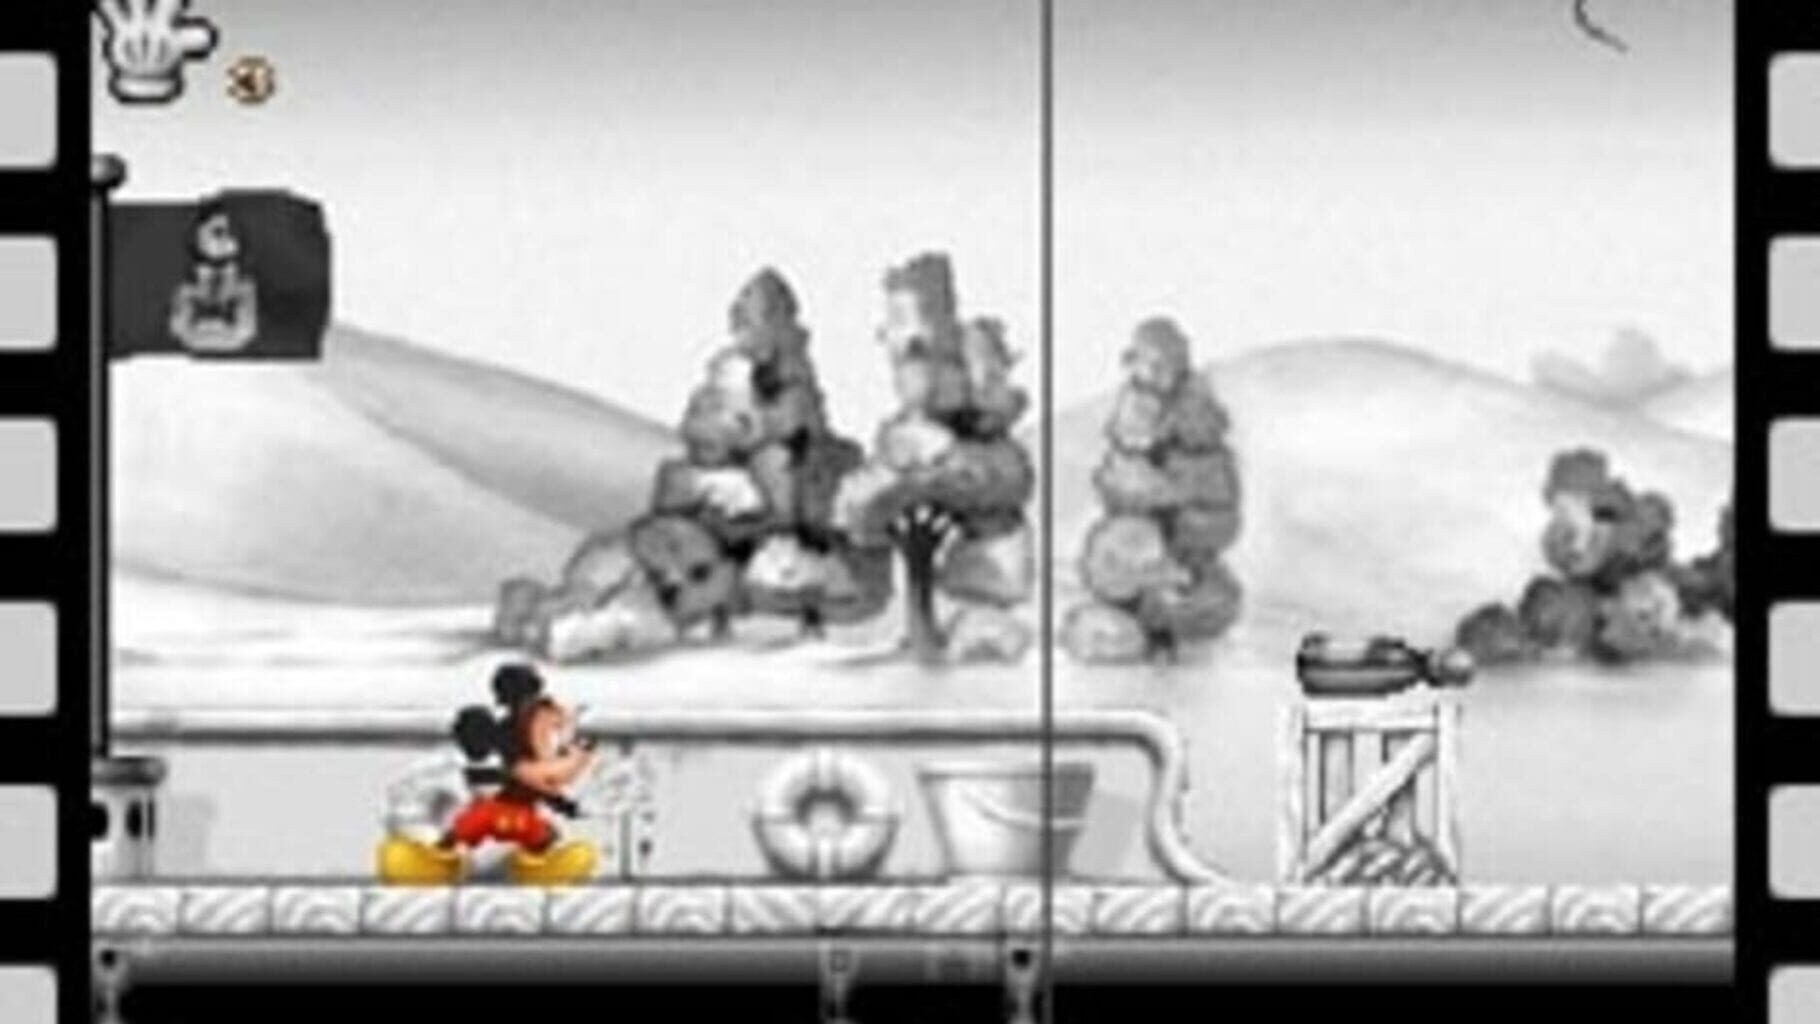 Mickey Mania: The Timeless Adventures of Mickey Mouse Image